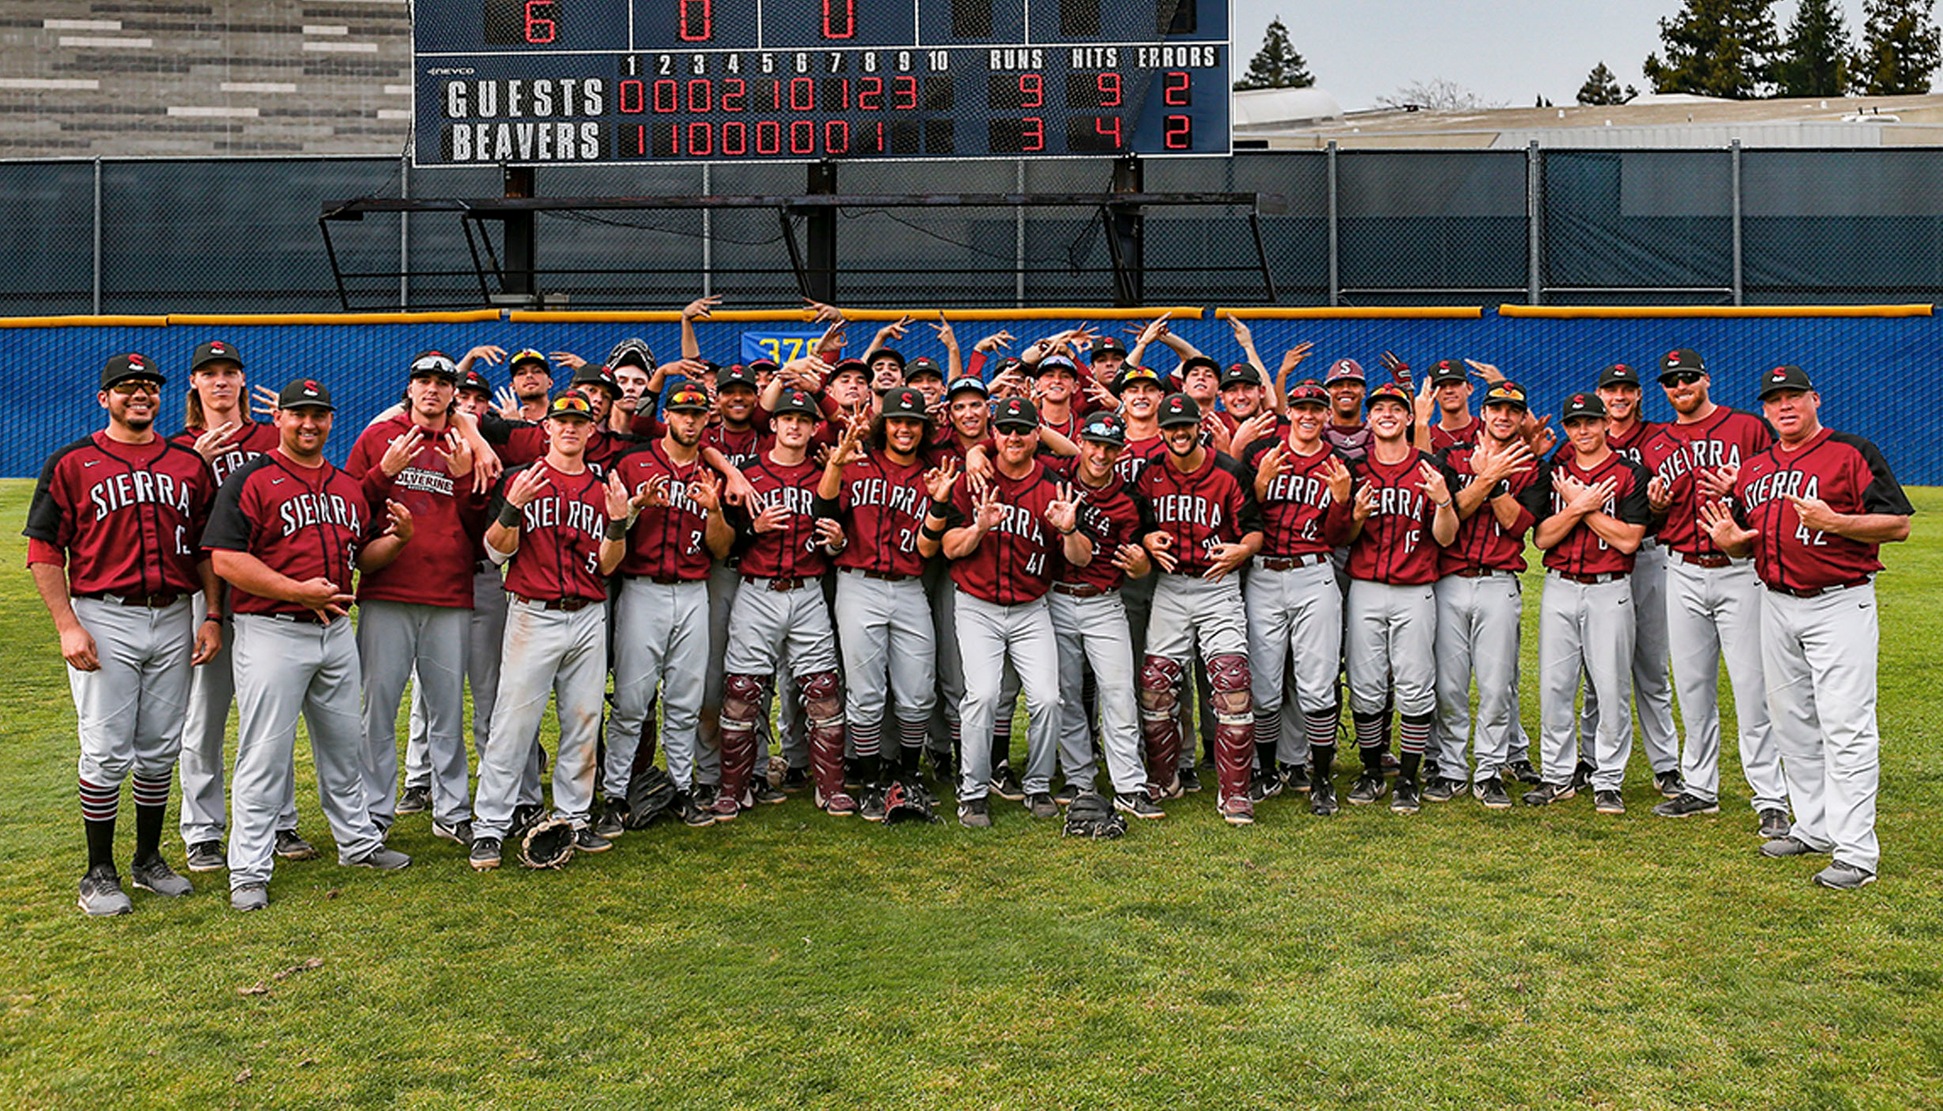 Sierra College Baseball team poses with Head Coach Rob Willson after he secured his 600th career win with a 9-3 victory at American River College on March 19, 2019. (Photo by Dave Lawicka)